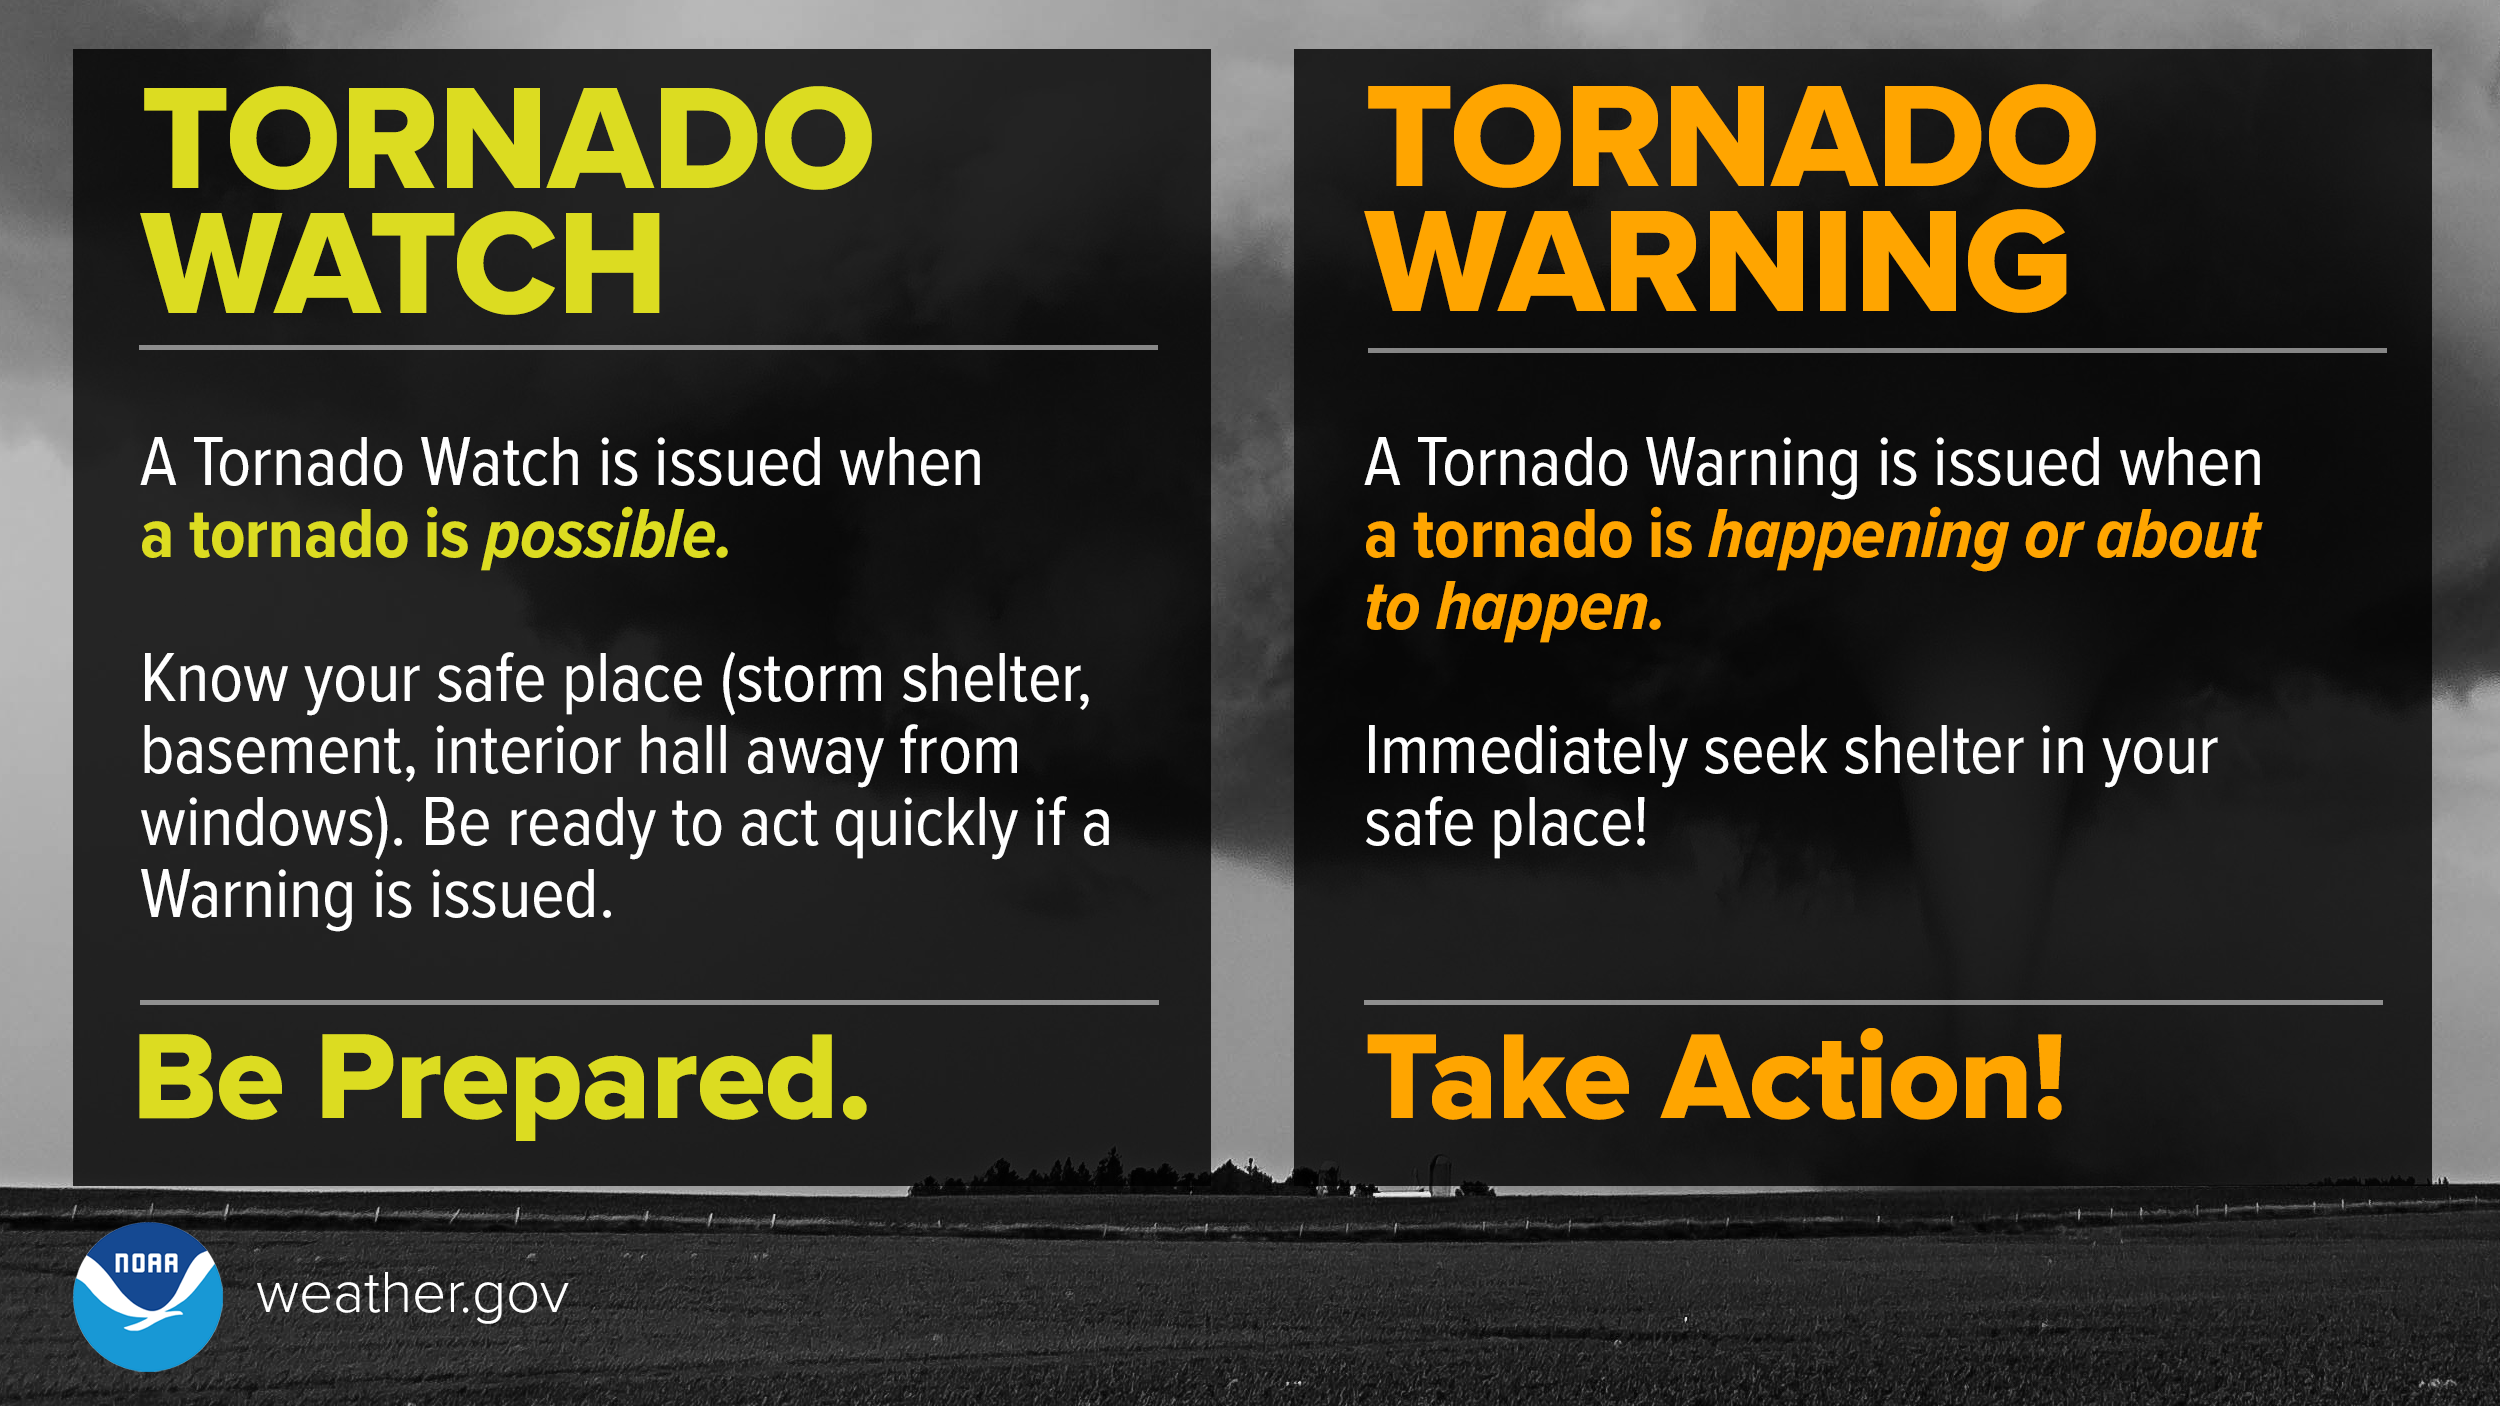 1. A Tornado Watch mean be prepared. A Tornado Watch is issued when a tornado is possible. Know your safe place, such as a storm shelter, basement, or interior hall away from windows, and be prepared to act if a Warning is issued. 2. A Tornado Warning means take action!  A Tornado Warning is issued when a tornado is happening or about to happen. Immediately seek shelter in your safe place!